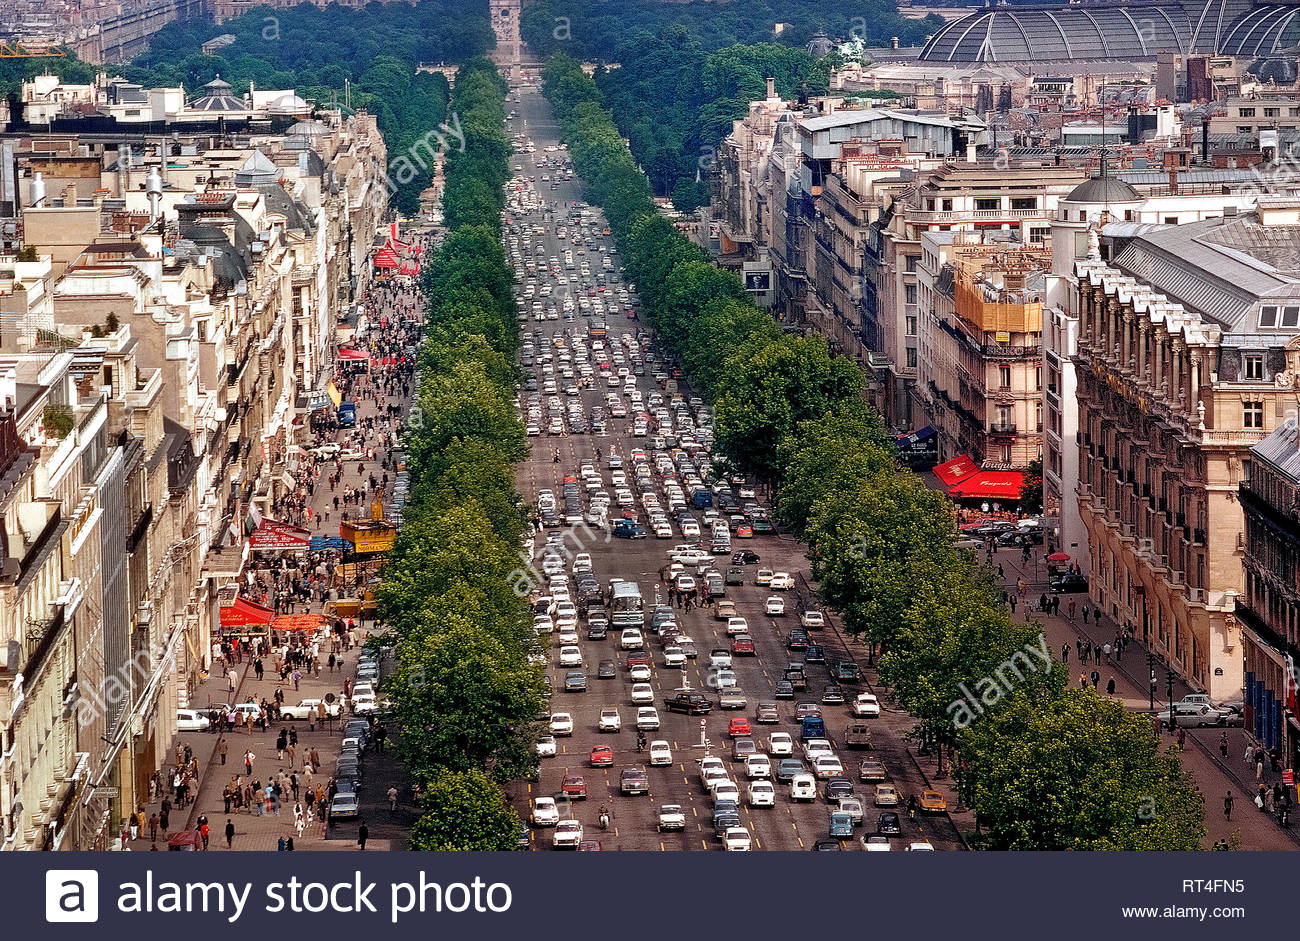 an aerial view shows the beautiful tree lined champs lyses one of the busiest and most congested avenues in all of paris france the famous 12 mile long 19 km thoroughfare runs between two of the french capitals monumental landmarks the place de la concorde and arc de triomphe since this photograph was taken in 1983 the 11 lanes of traffic have been reduced to eight and there are plans to reduce vehicle use even more in order widen the sidewalks and make the street more pedestrian friendly by the mid 2020s RT4FN5